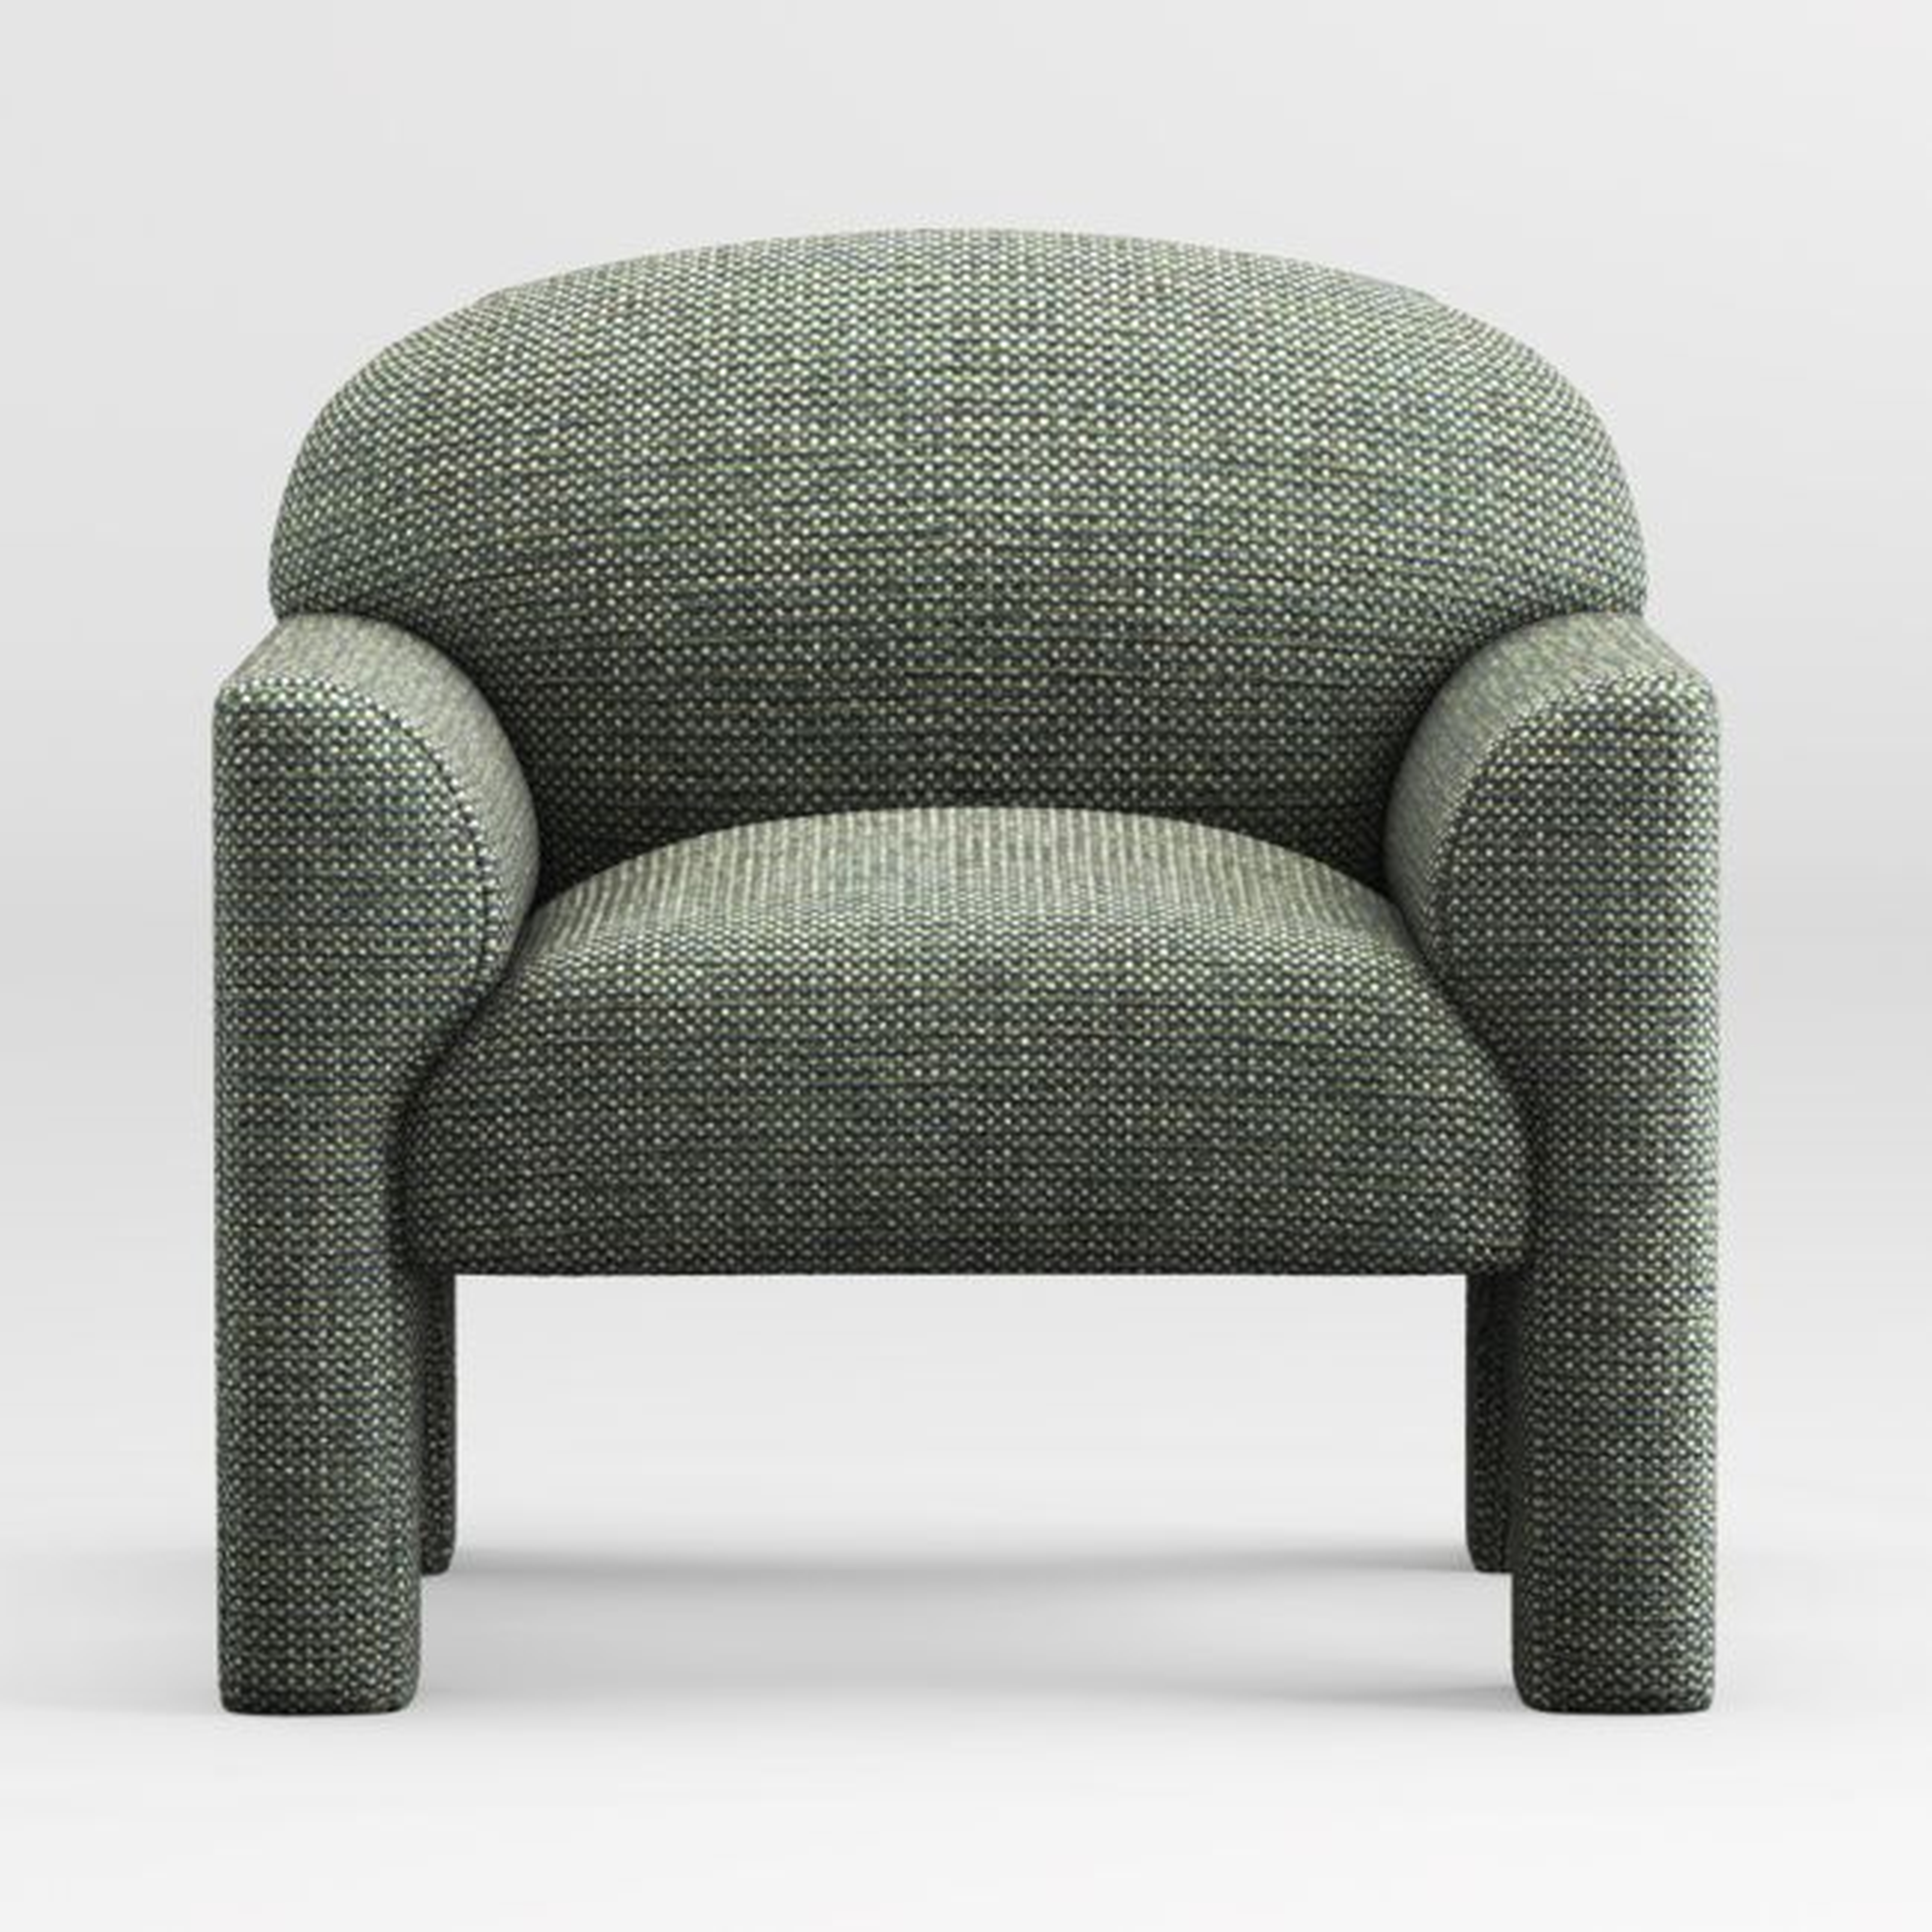 Archie Chair - Crate and Barrel